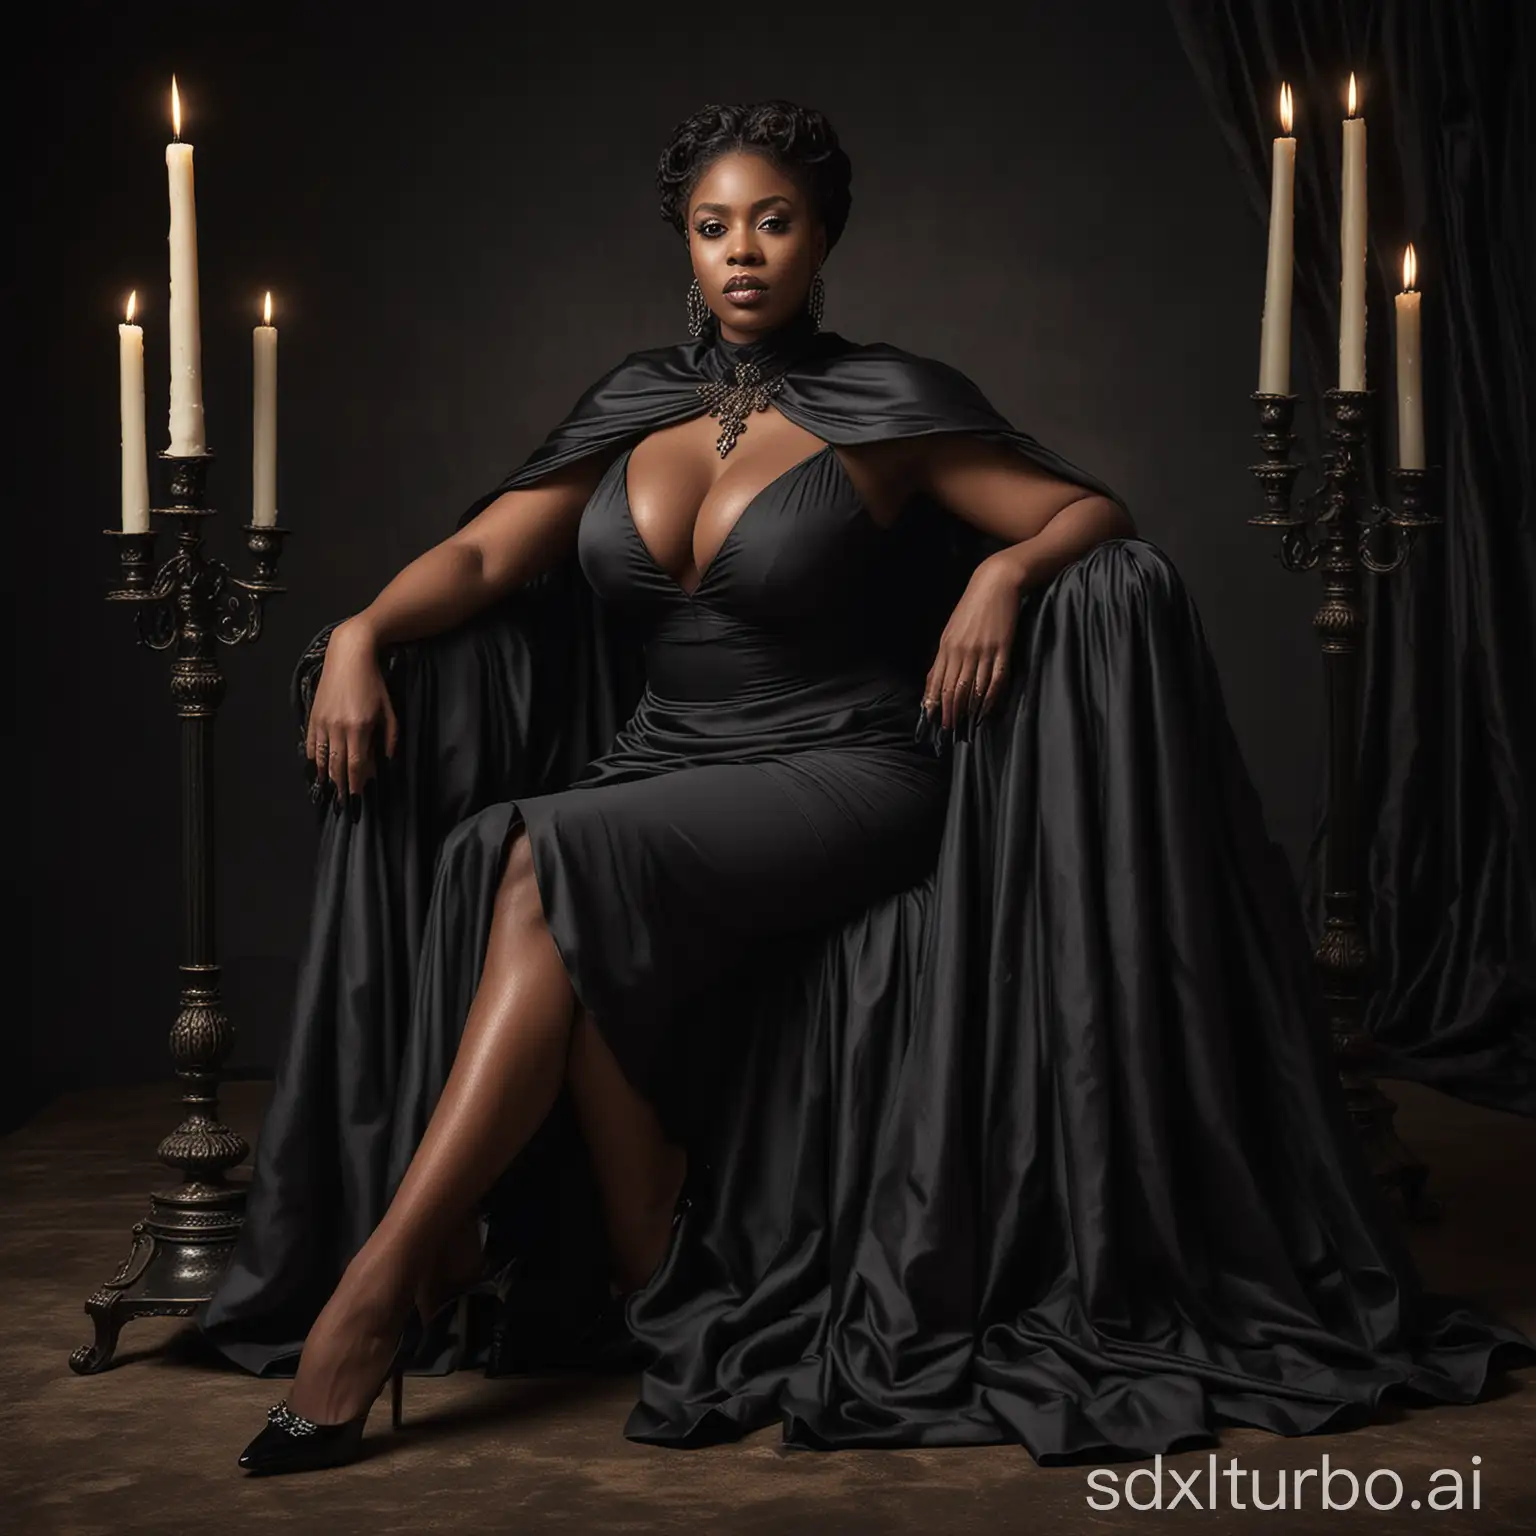 A stunning photograph of a powerful and majestic busty black woman sitting gracefully on a luxurious black throne. She exudes confidence and command, dressed in a mesmerizing black cape with a high collar, which drapes elegantly over her shoulders. Her sophisticated attire shows her exquisite taste and imposing presence. High heel shoes add a sensual touch to the scene, enhancing its balance and grace. A single candlestick adorned with black candles stands proudly beside her, casting a warm, inviting glow that envelopes the scene with an air of mystery and strength. This captivating image is a bold statement of power, confidence and beauty, leaving a lasting impression on all who behold it.,